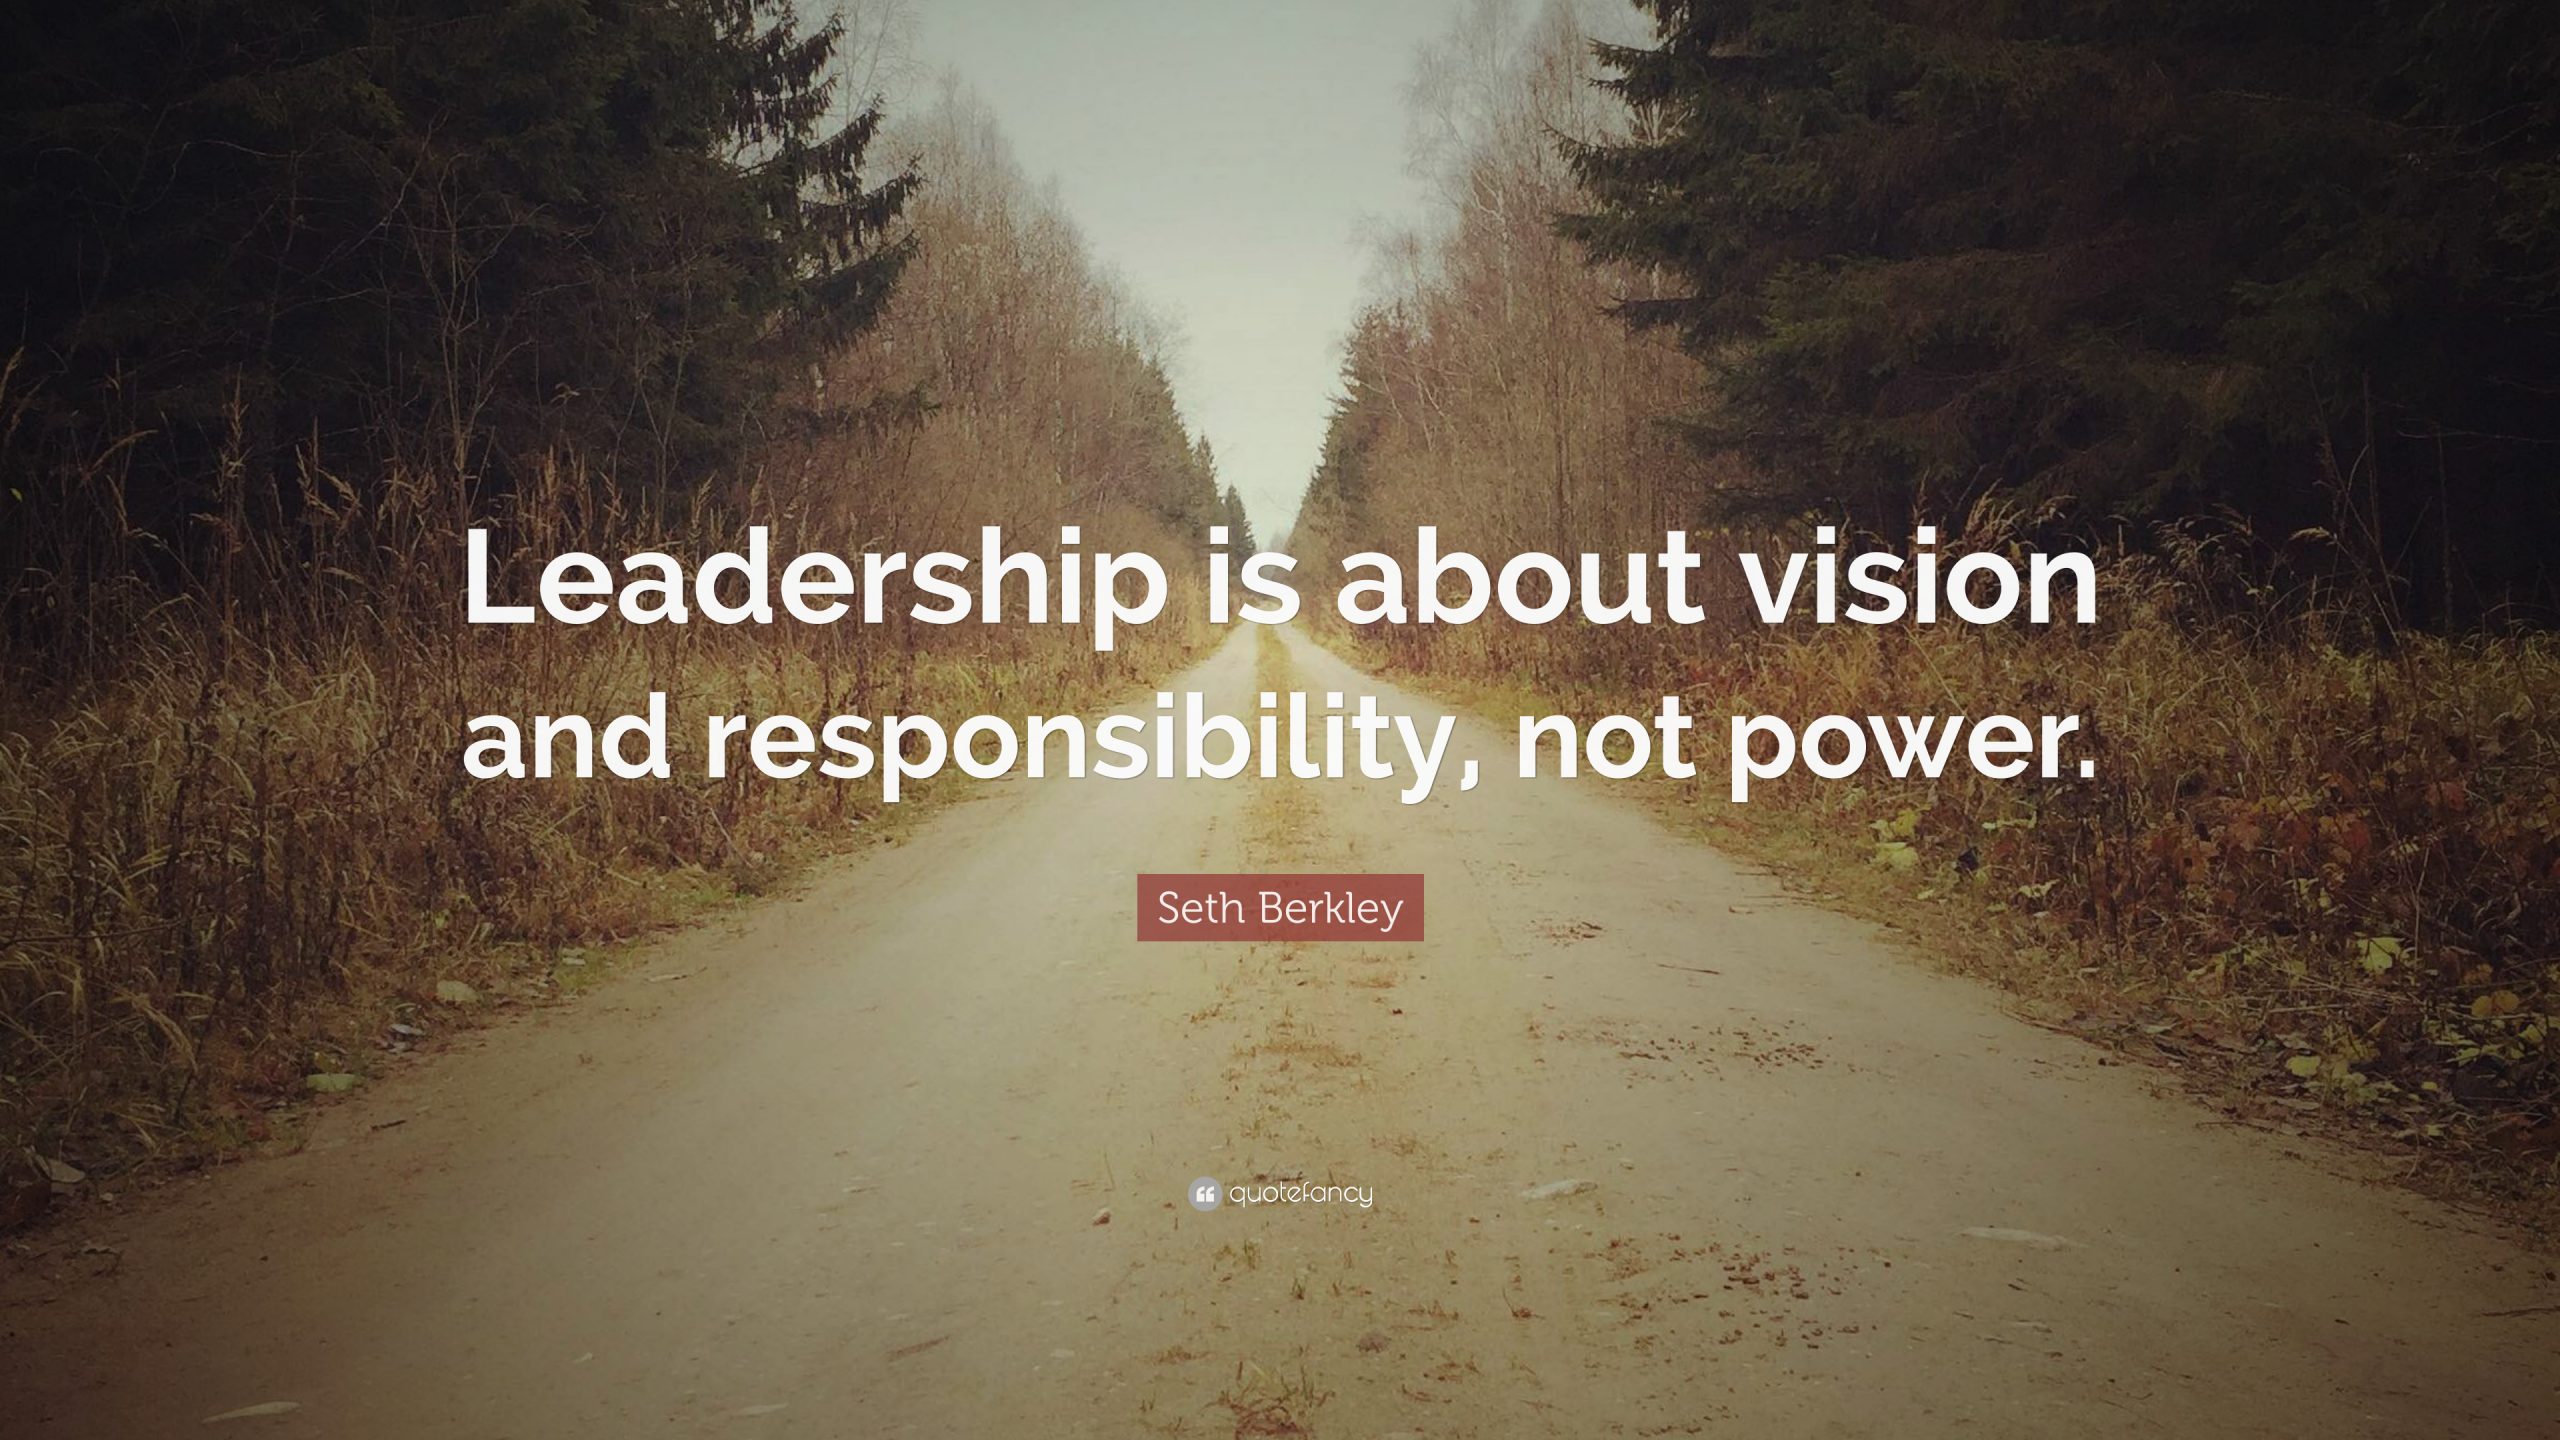 leadership is about vision and responsibility not power - Seth Berkley